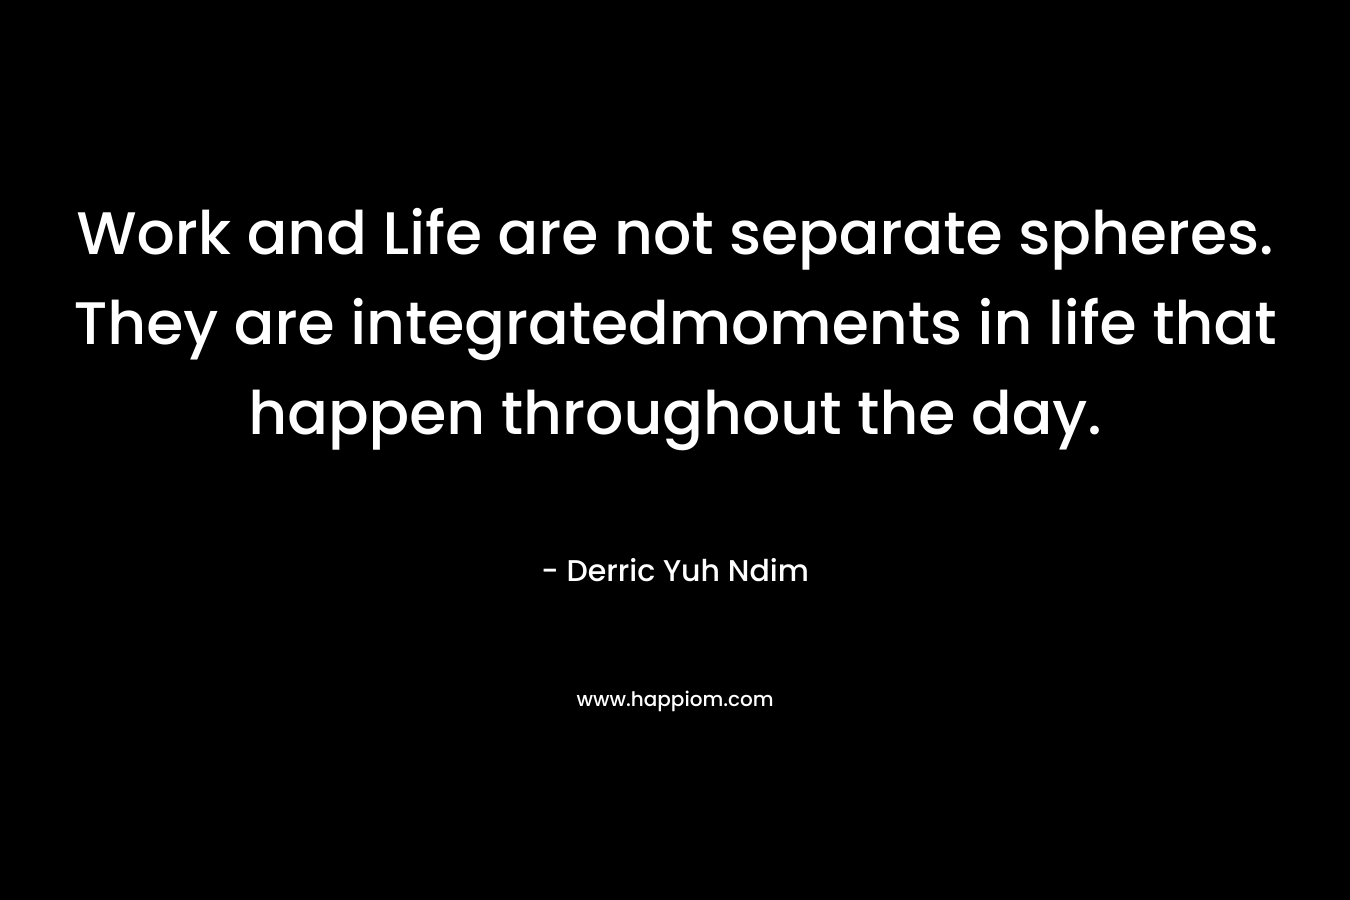 Work and Life are not separate spheres. They are integratedmoments in life that happen throughout the day. – Derric Yuh Ndim